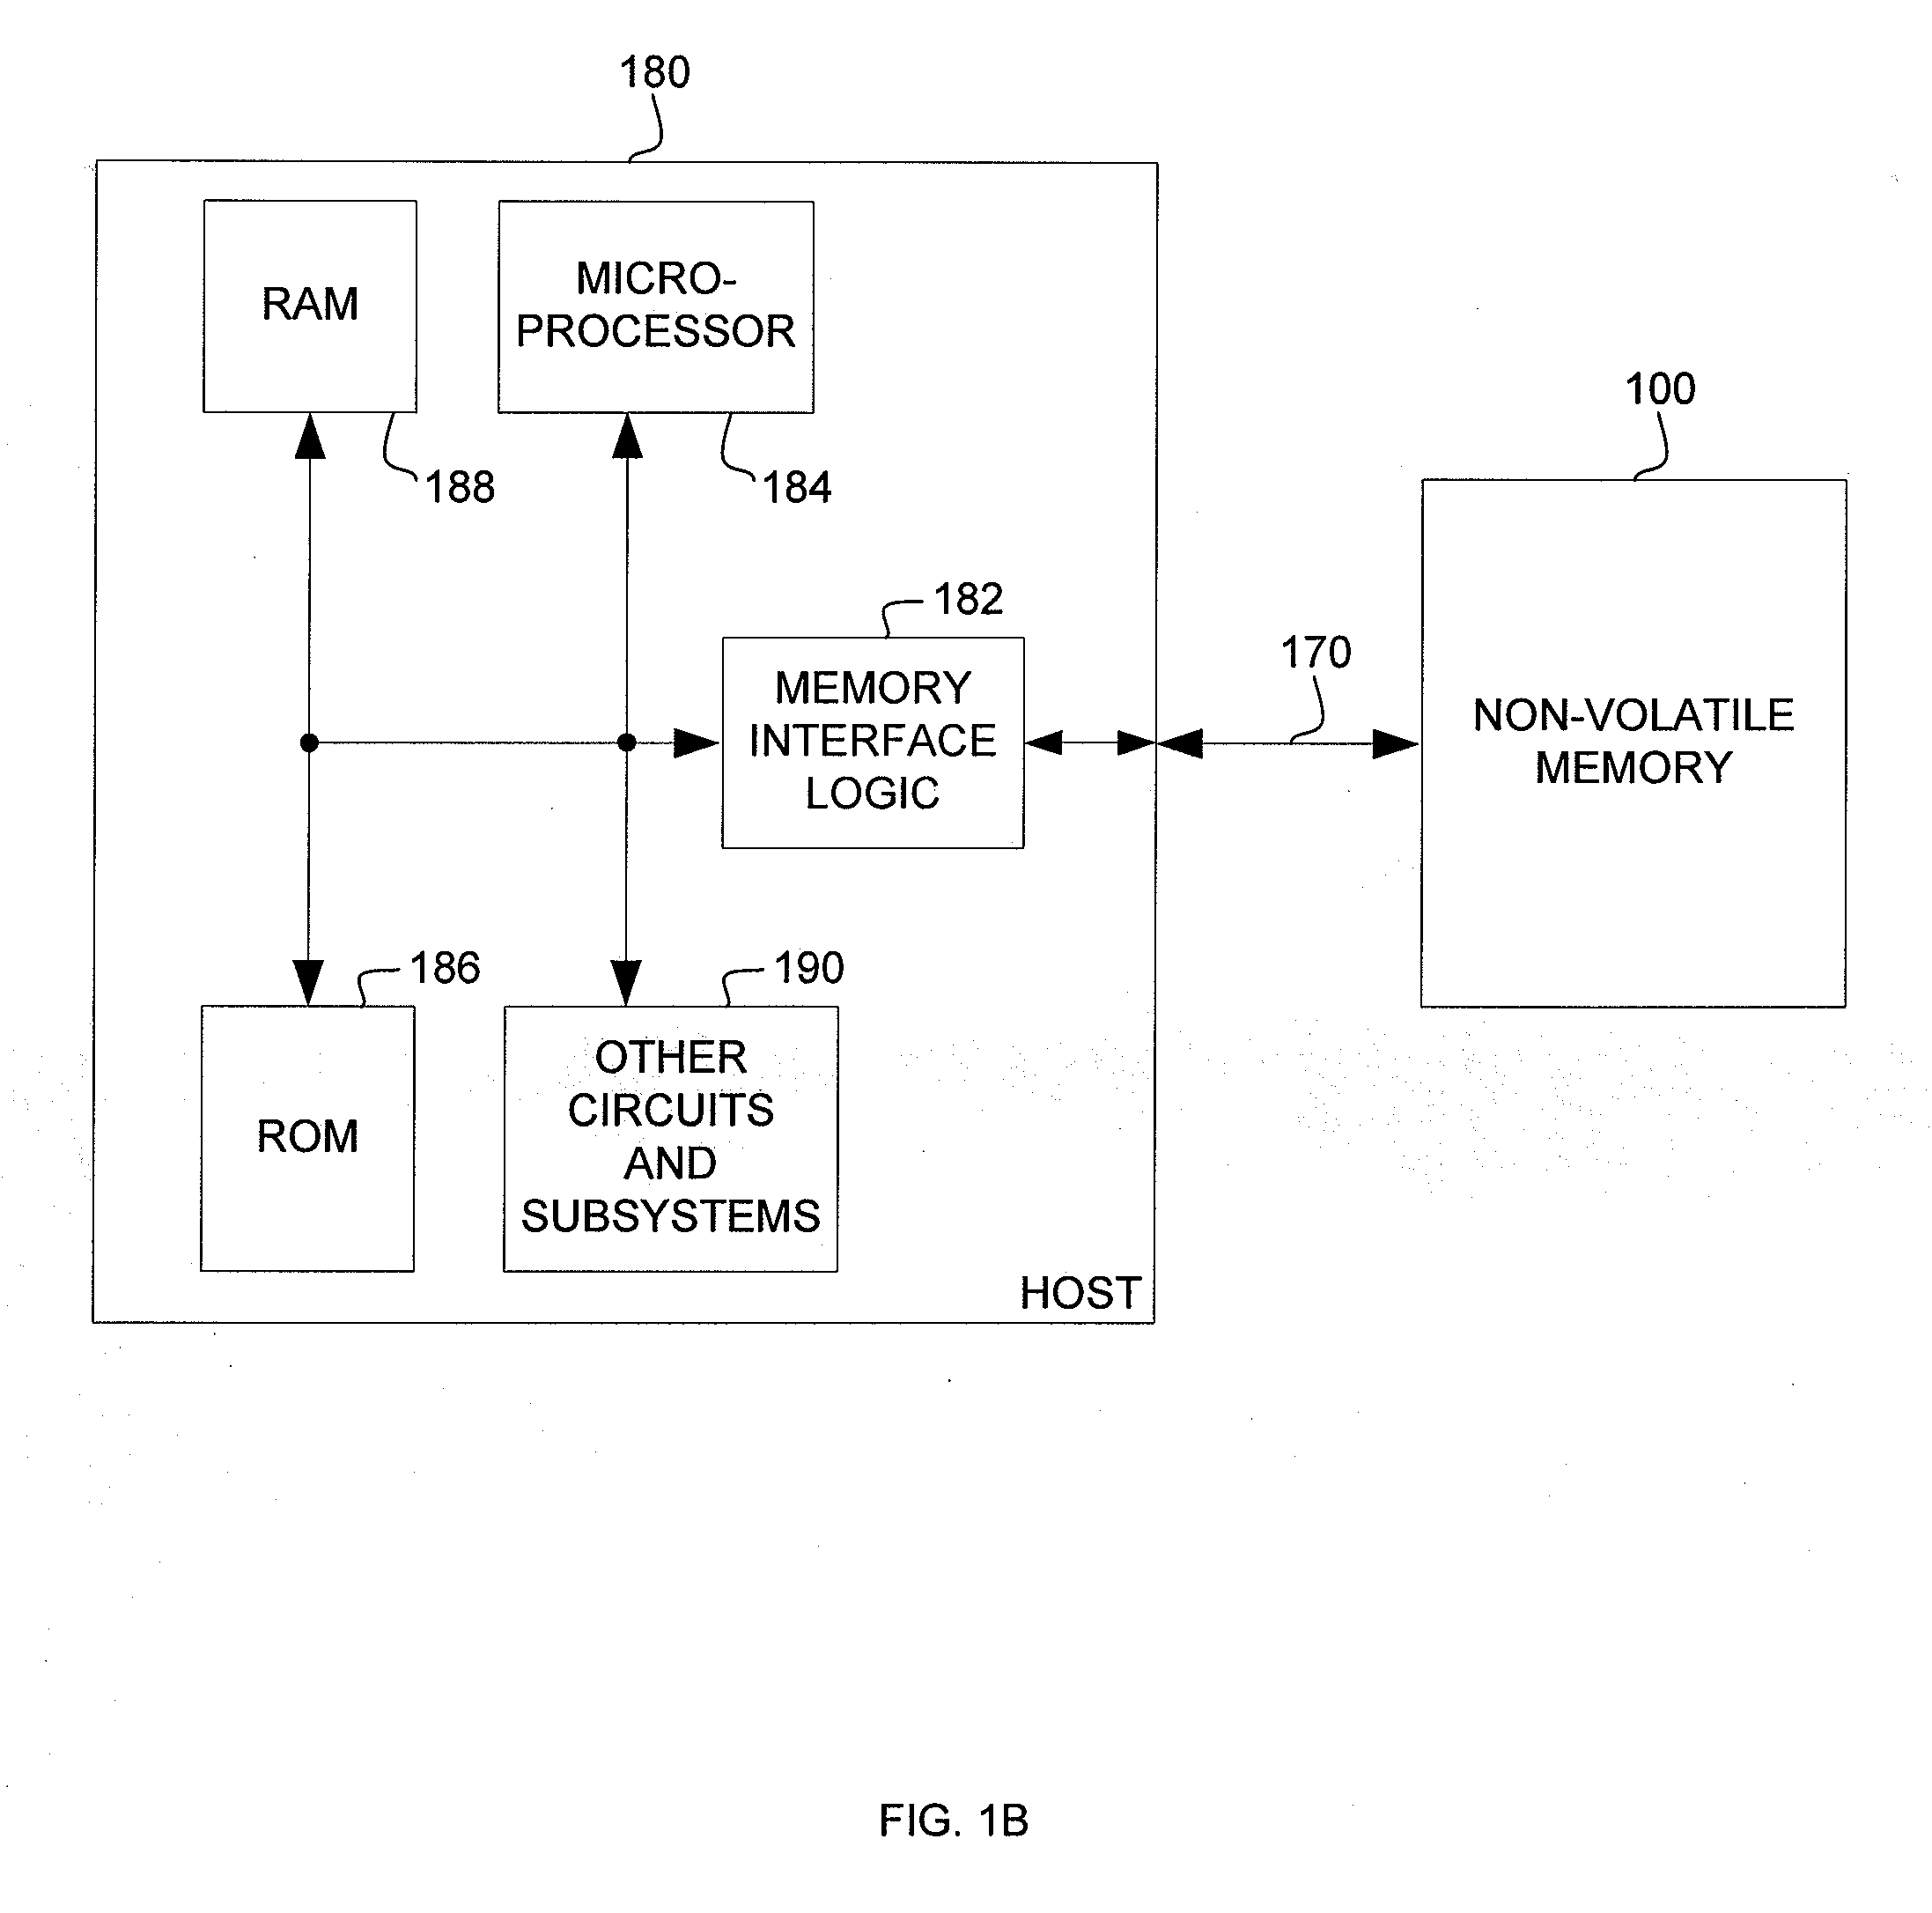 Method And System For Virtual Fast Access Non-Volatile RAM